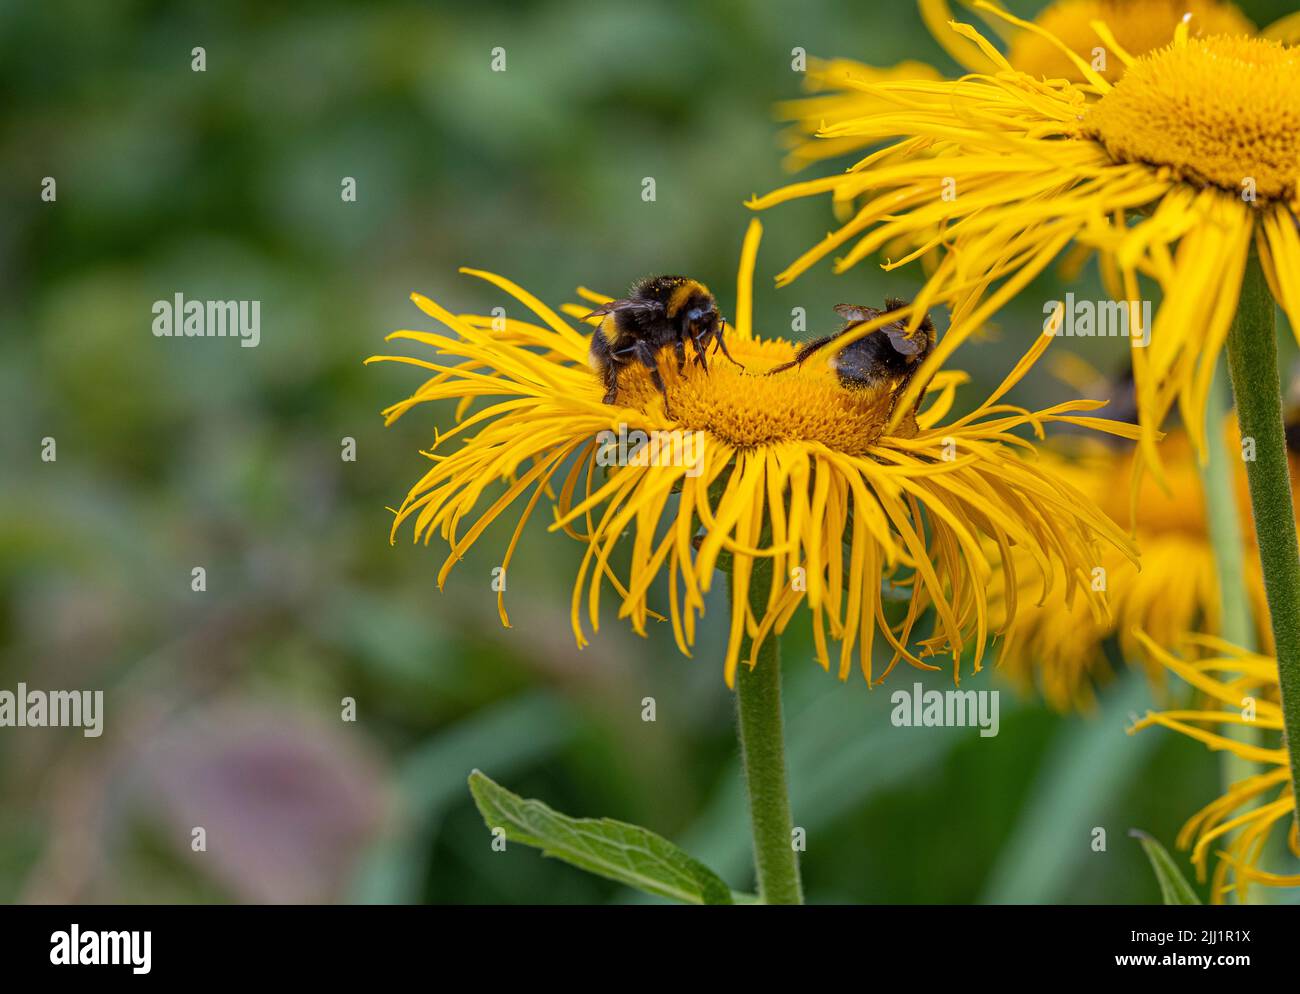 Bees pollinating the shaggy yellow flowers of Inula magnifica growing in a UK garden. Stock Photo